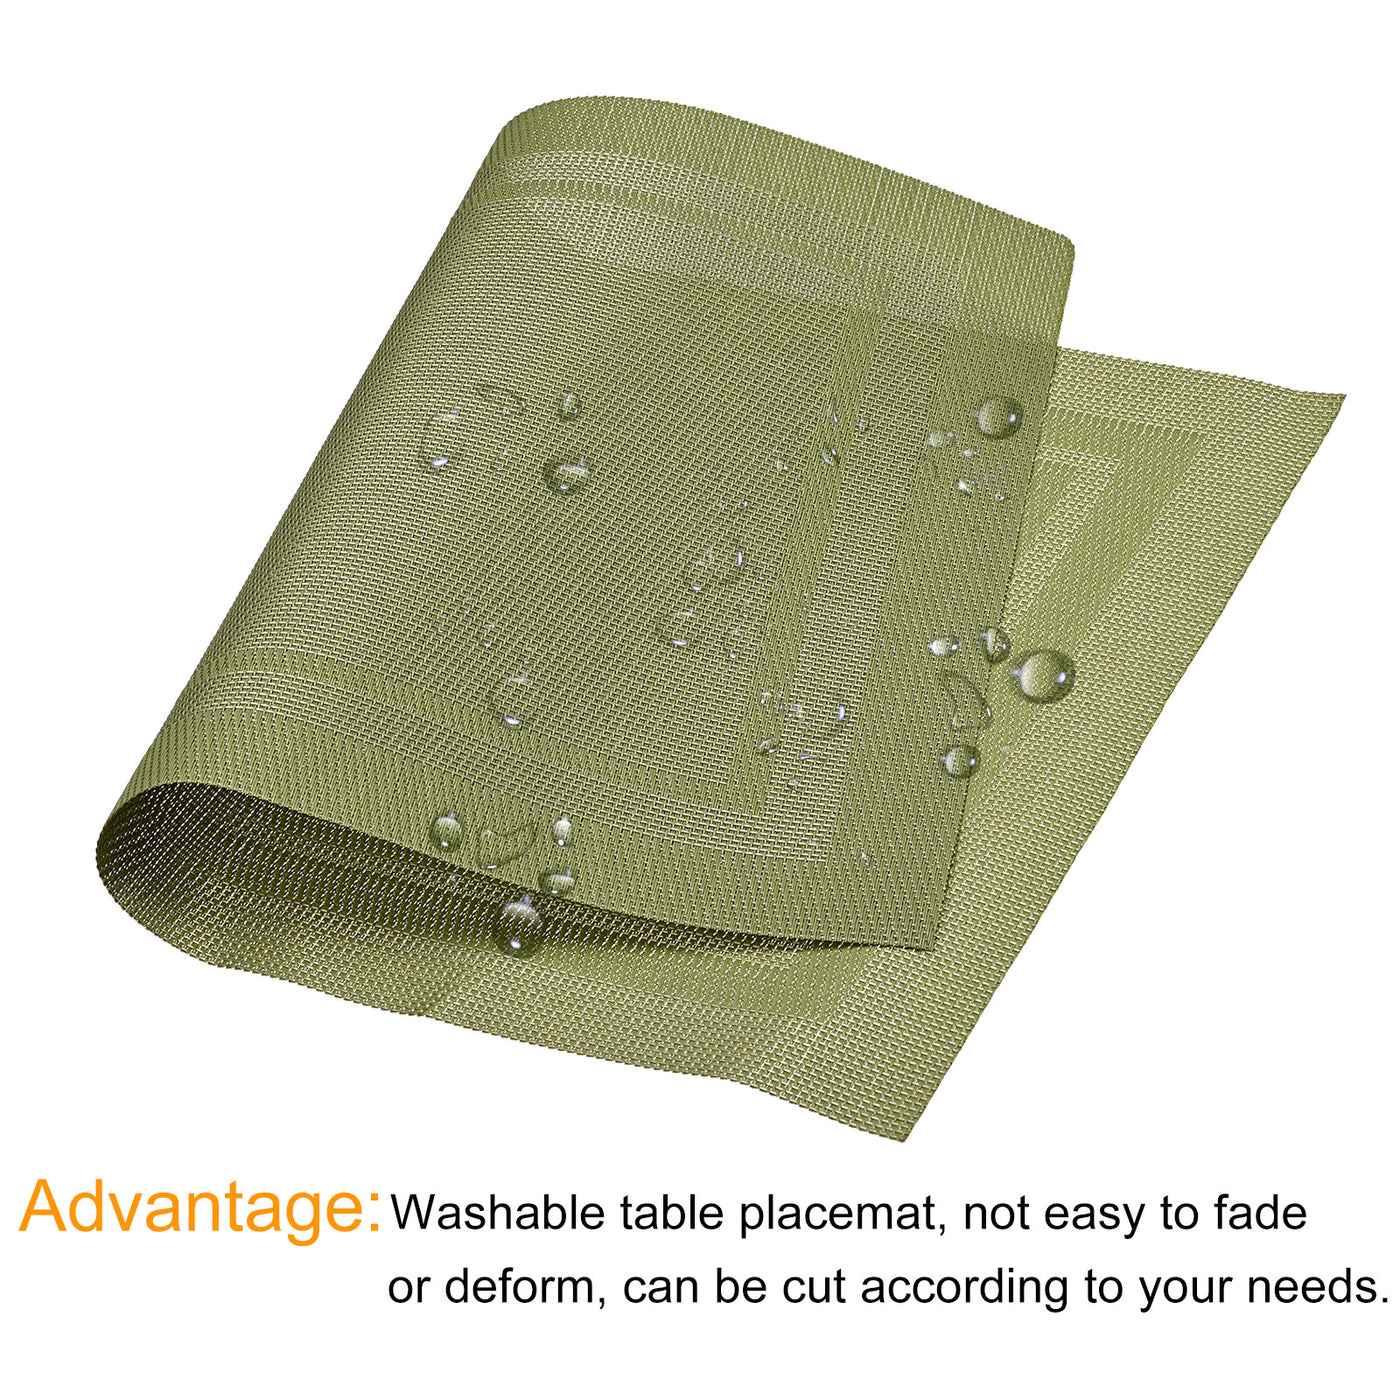 uxcell Uxcell Place Mats, 450x300mm Table Mats Set of 2 PVC Washable Woven Placemat Green